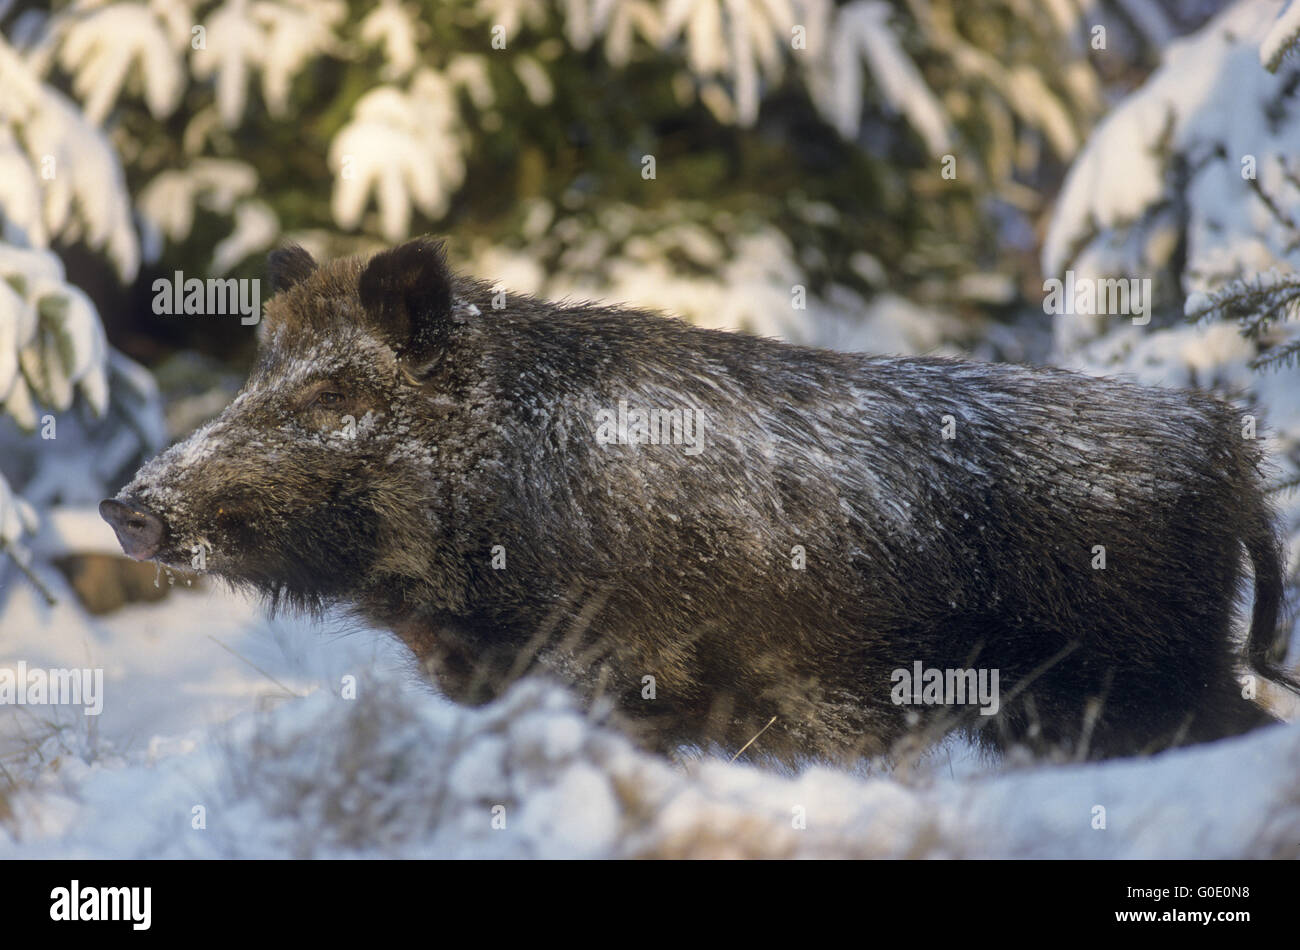 Young Wild Boar crosses a snowy forest glade Stock Photo